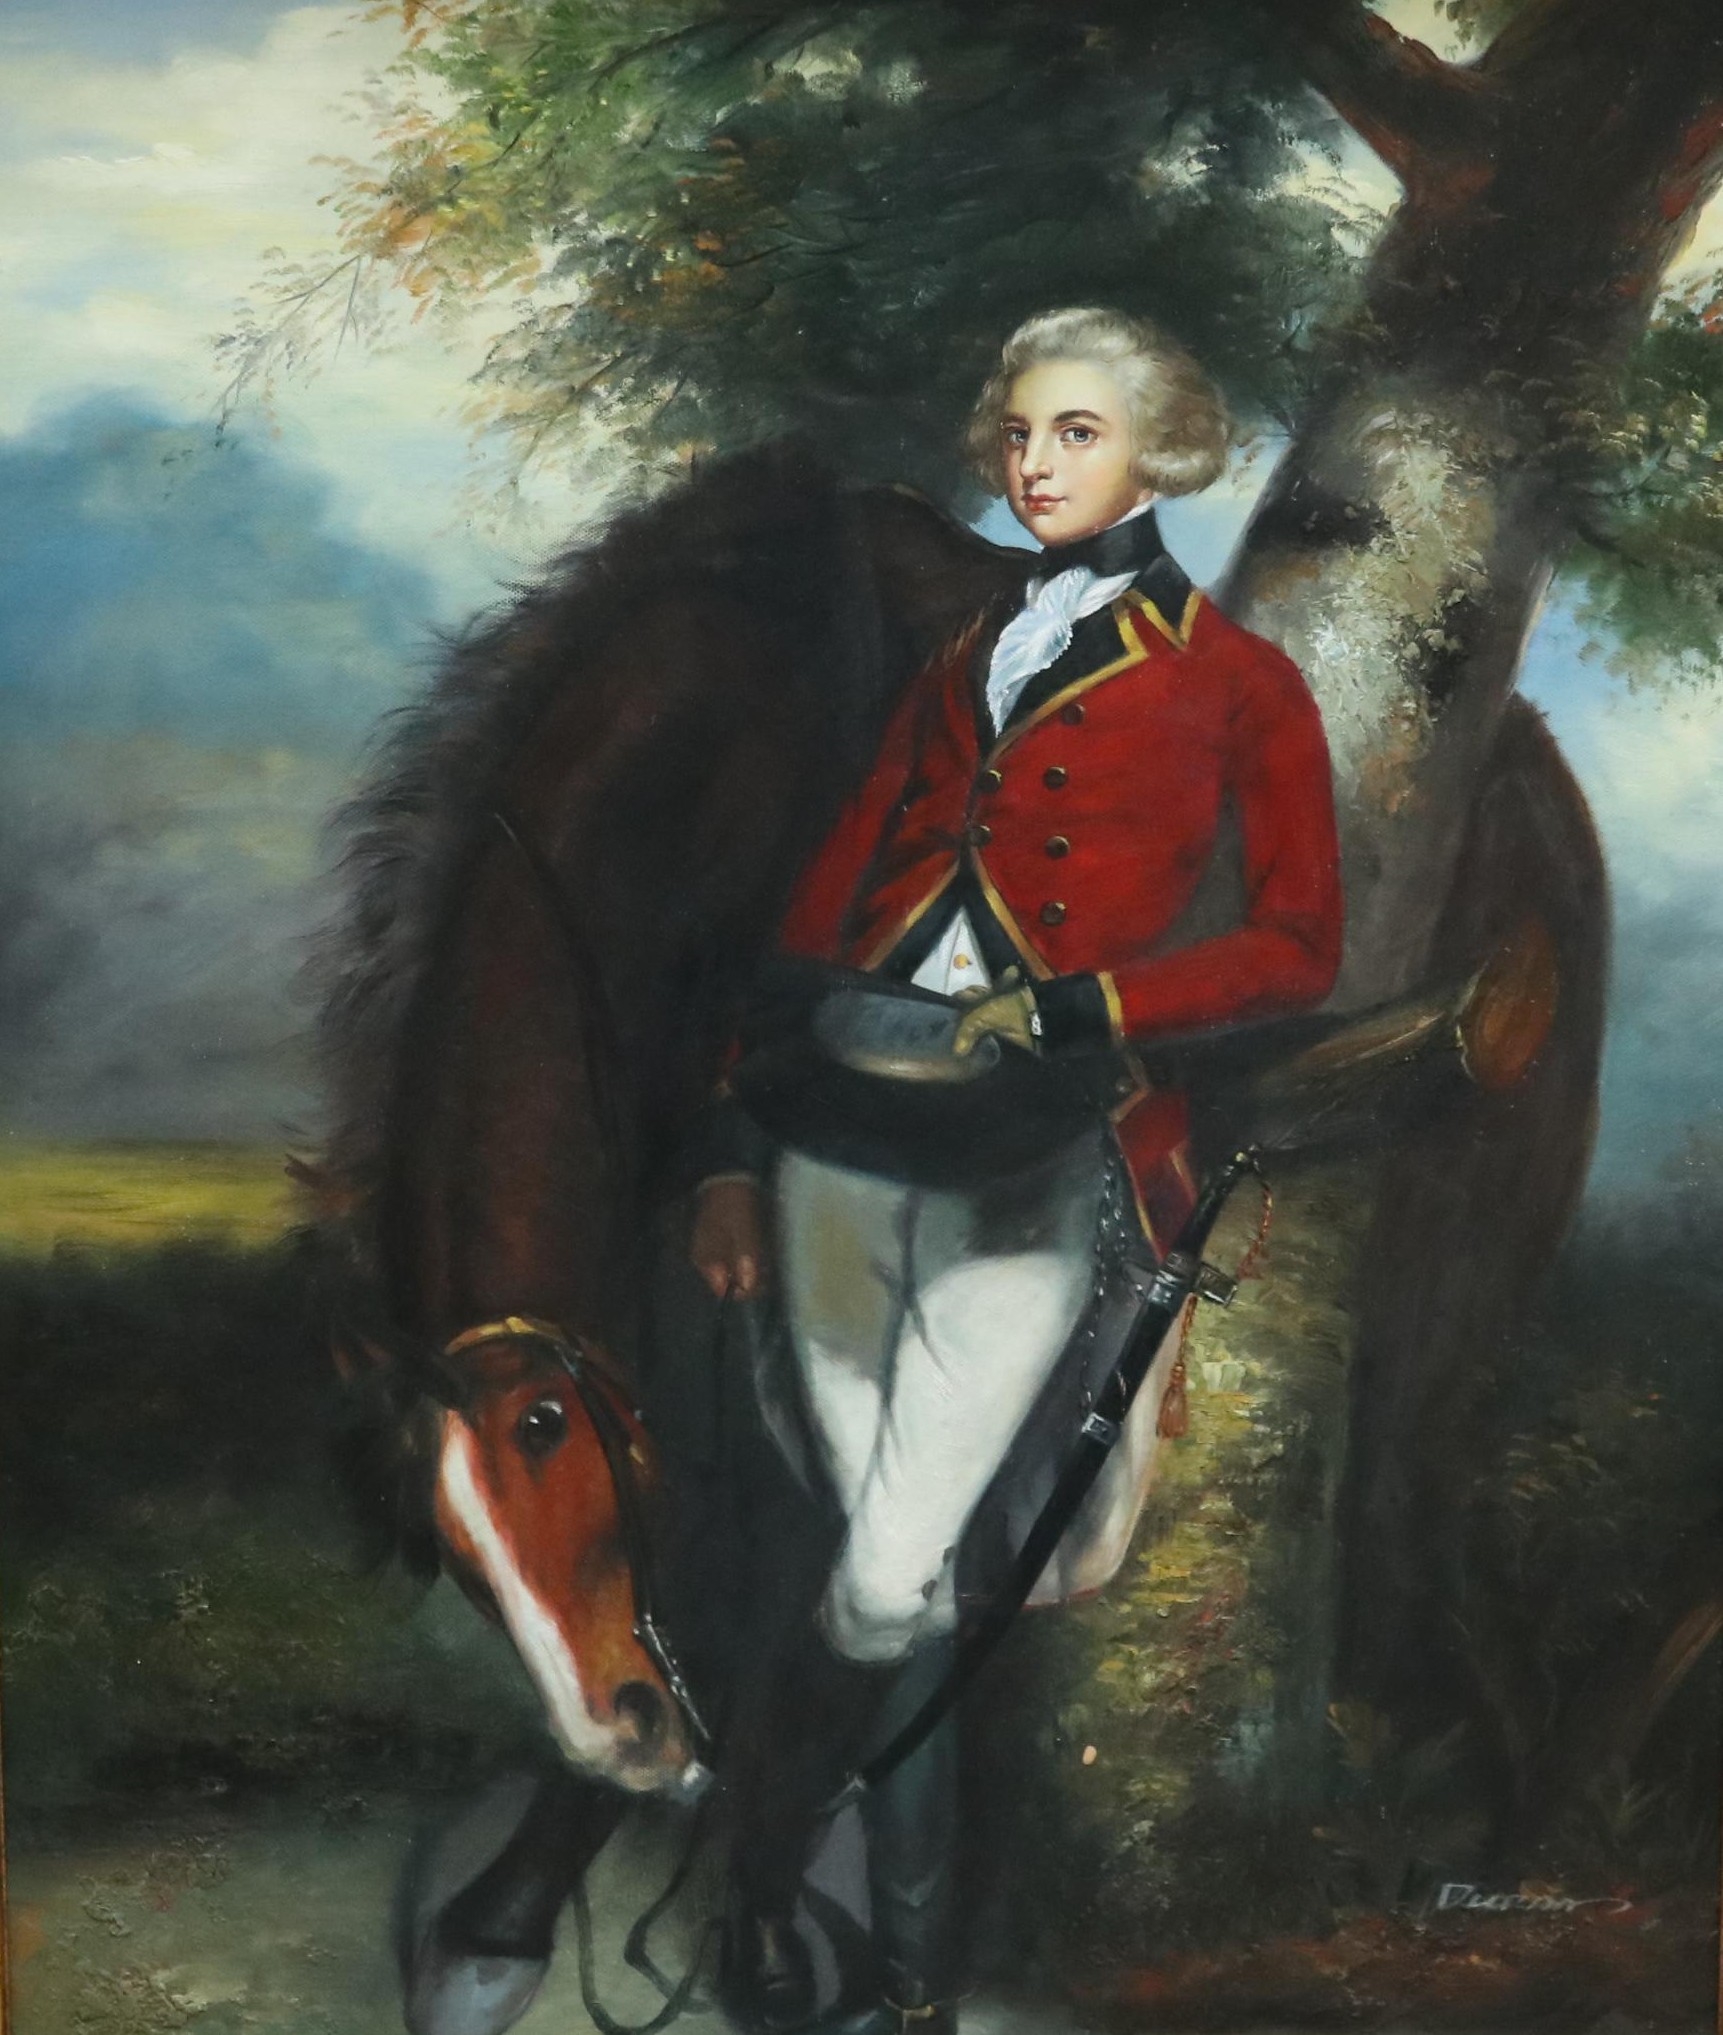 Artwork by Sir Joshua Reynolds, Captain George K.H. Coussmaker, Made of OIL ON BOARD